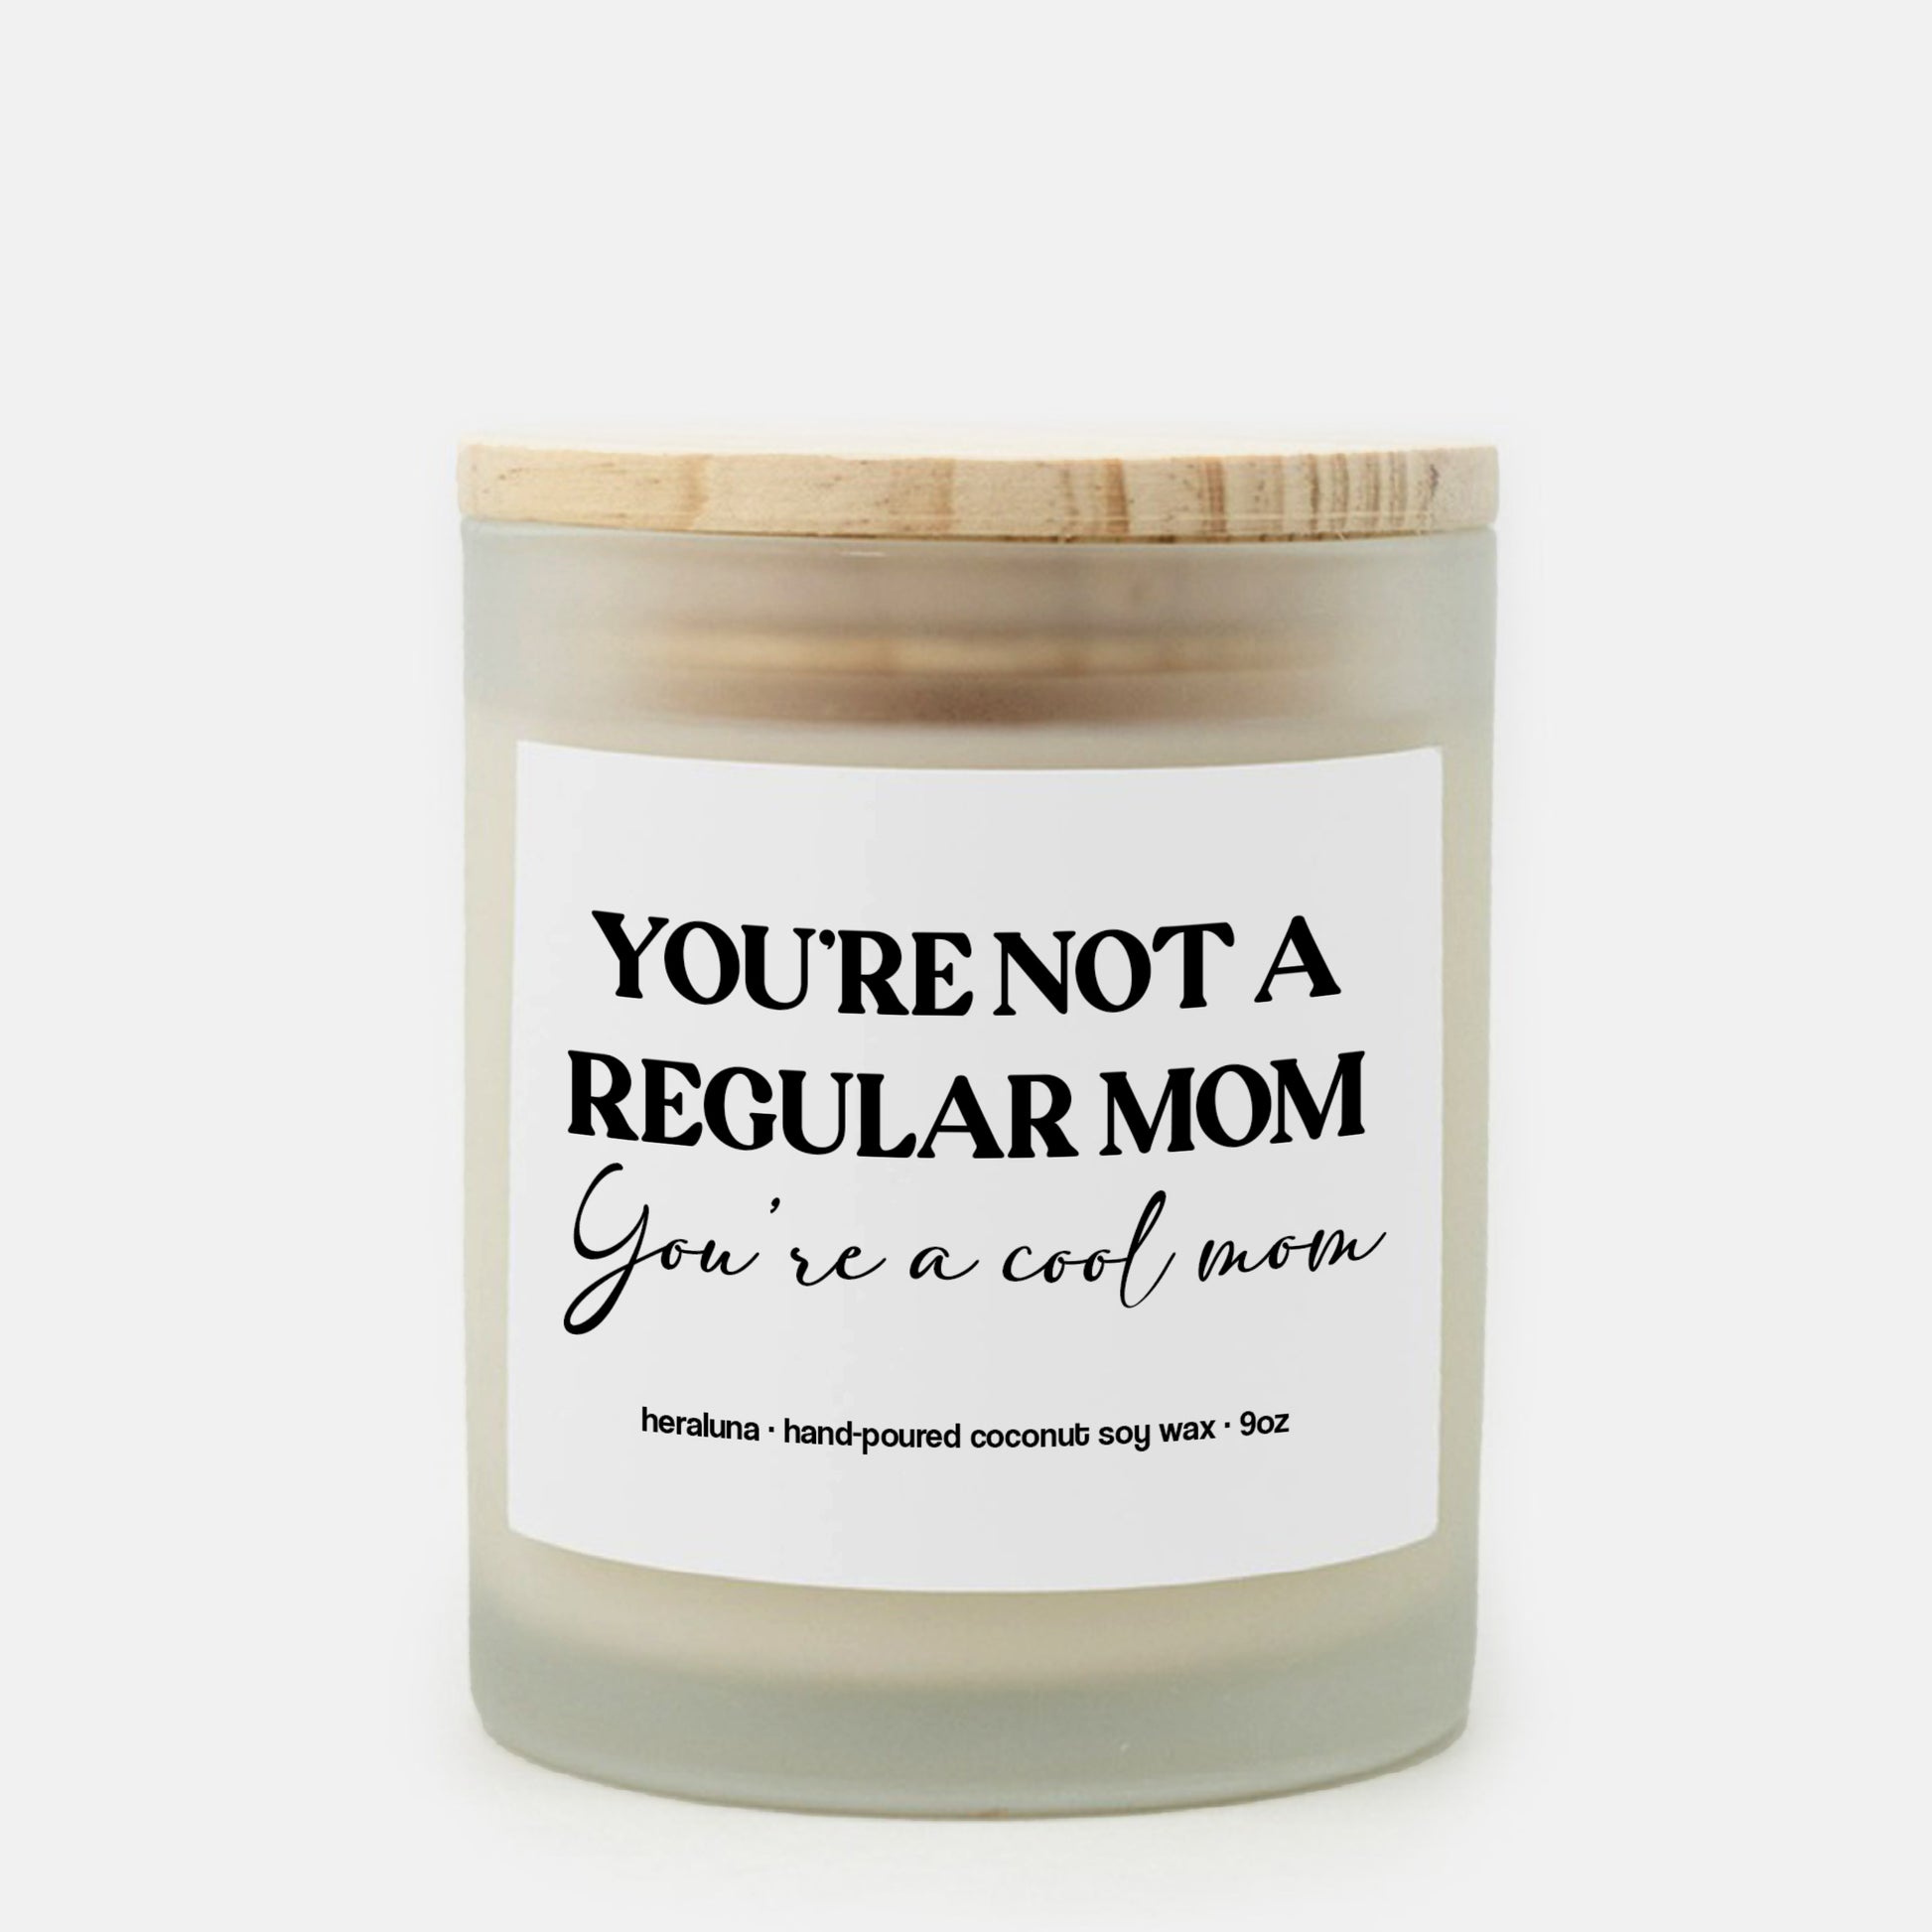 You're Not Like A Regular Mom, You're a Cool Mom Candle – C & E